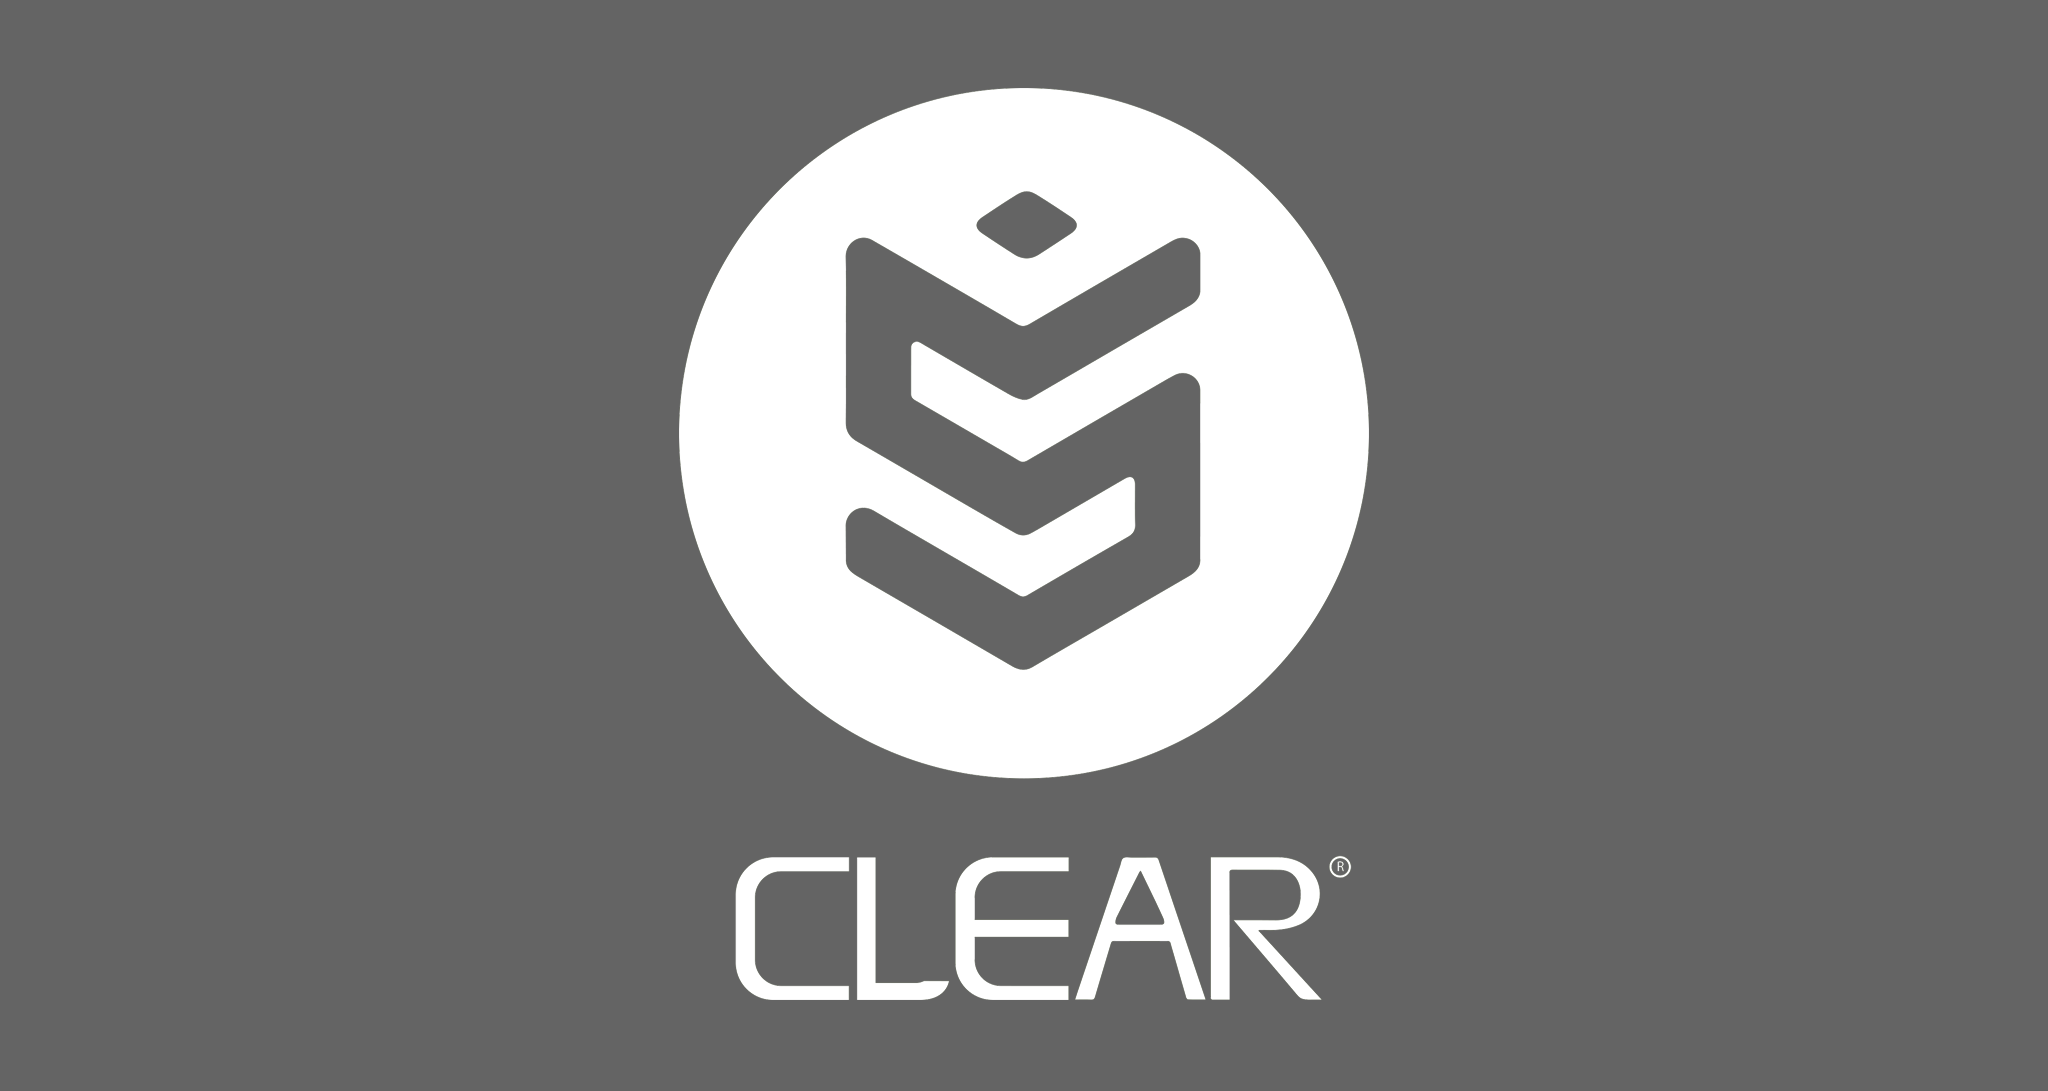 How to Create a ClearFoundation Portal Account and CLEAR Token Wallet